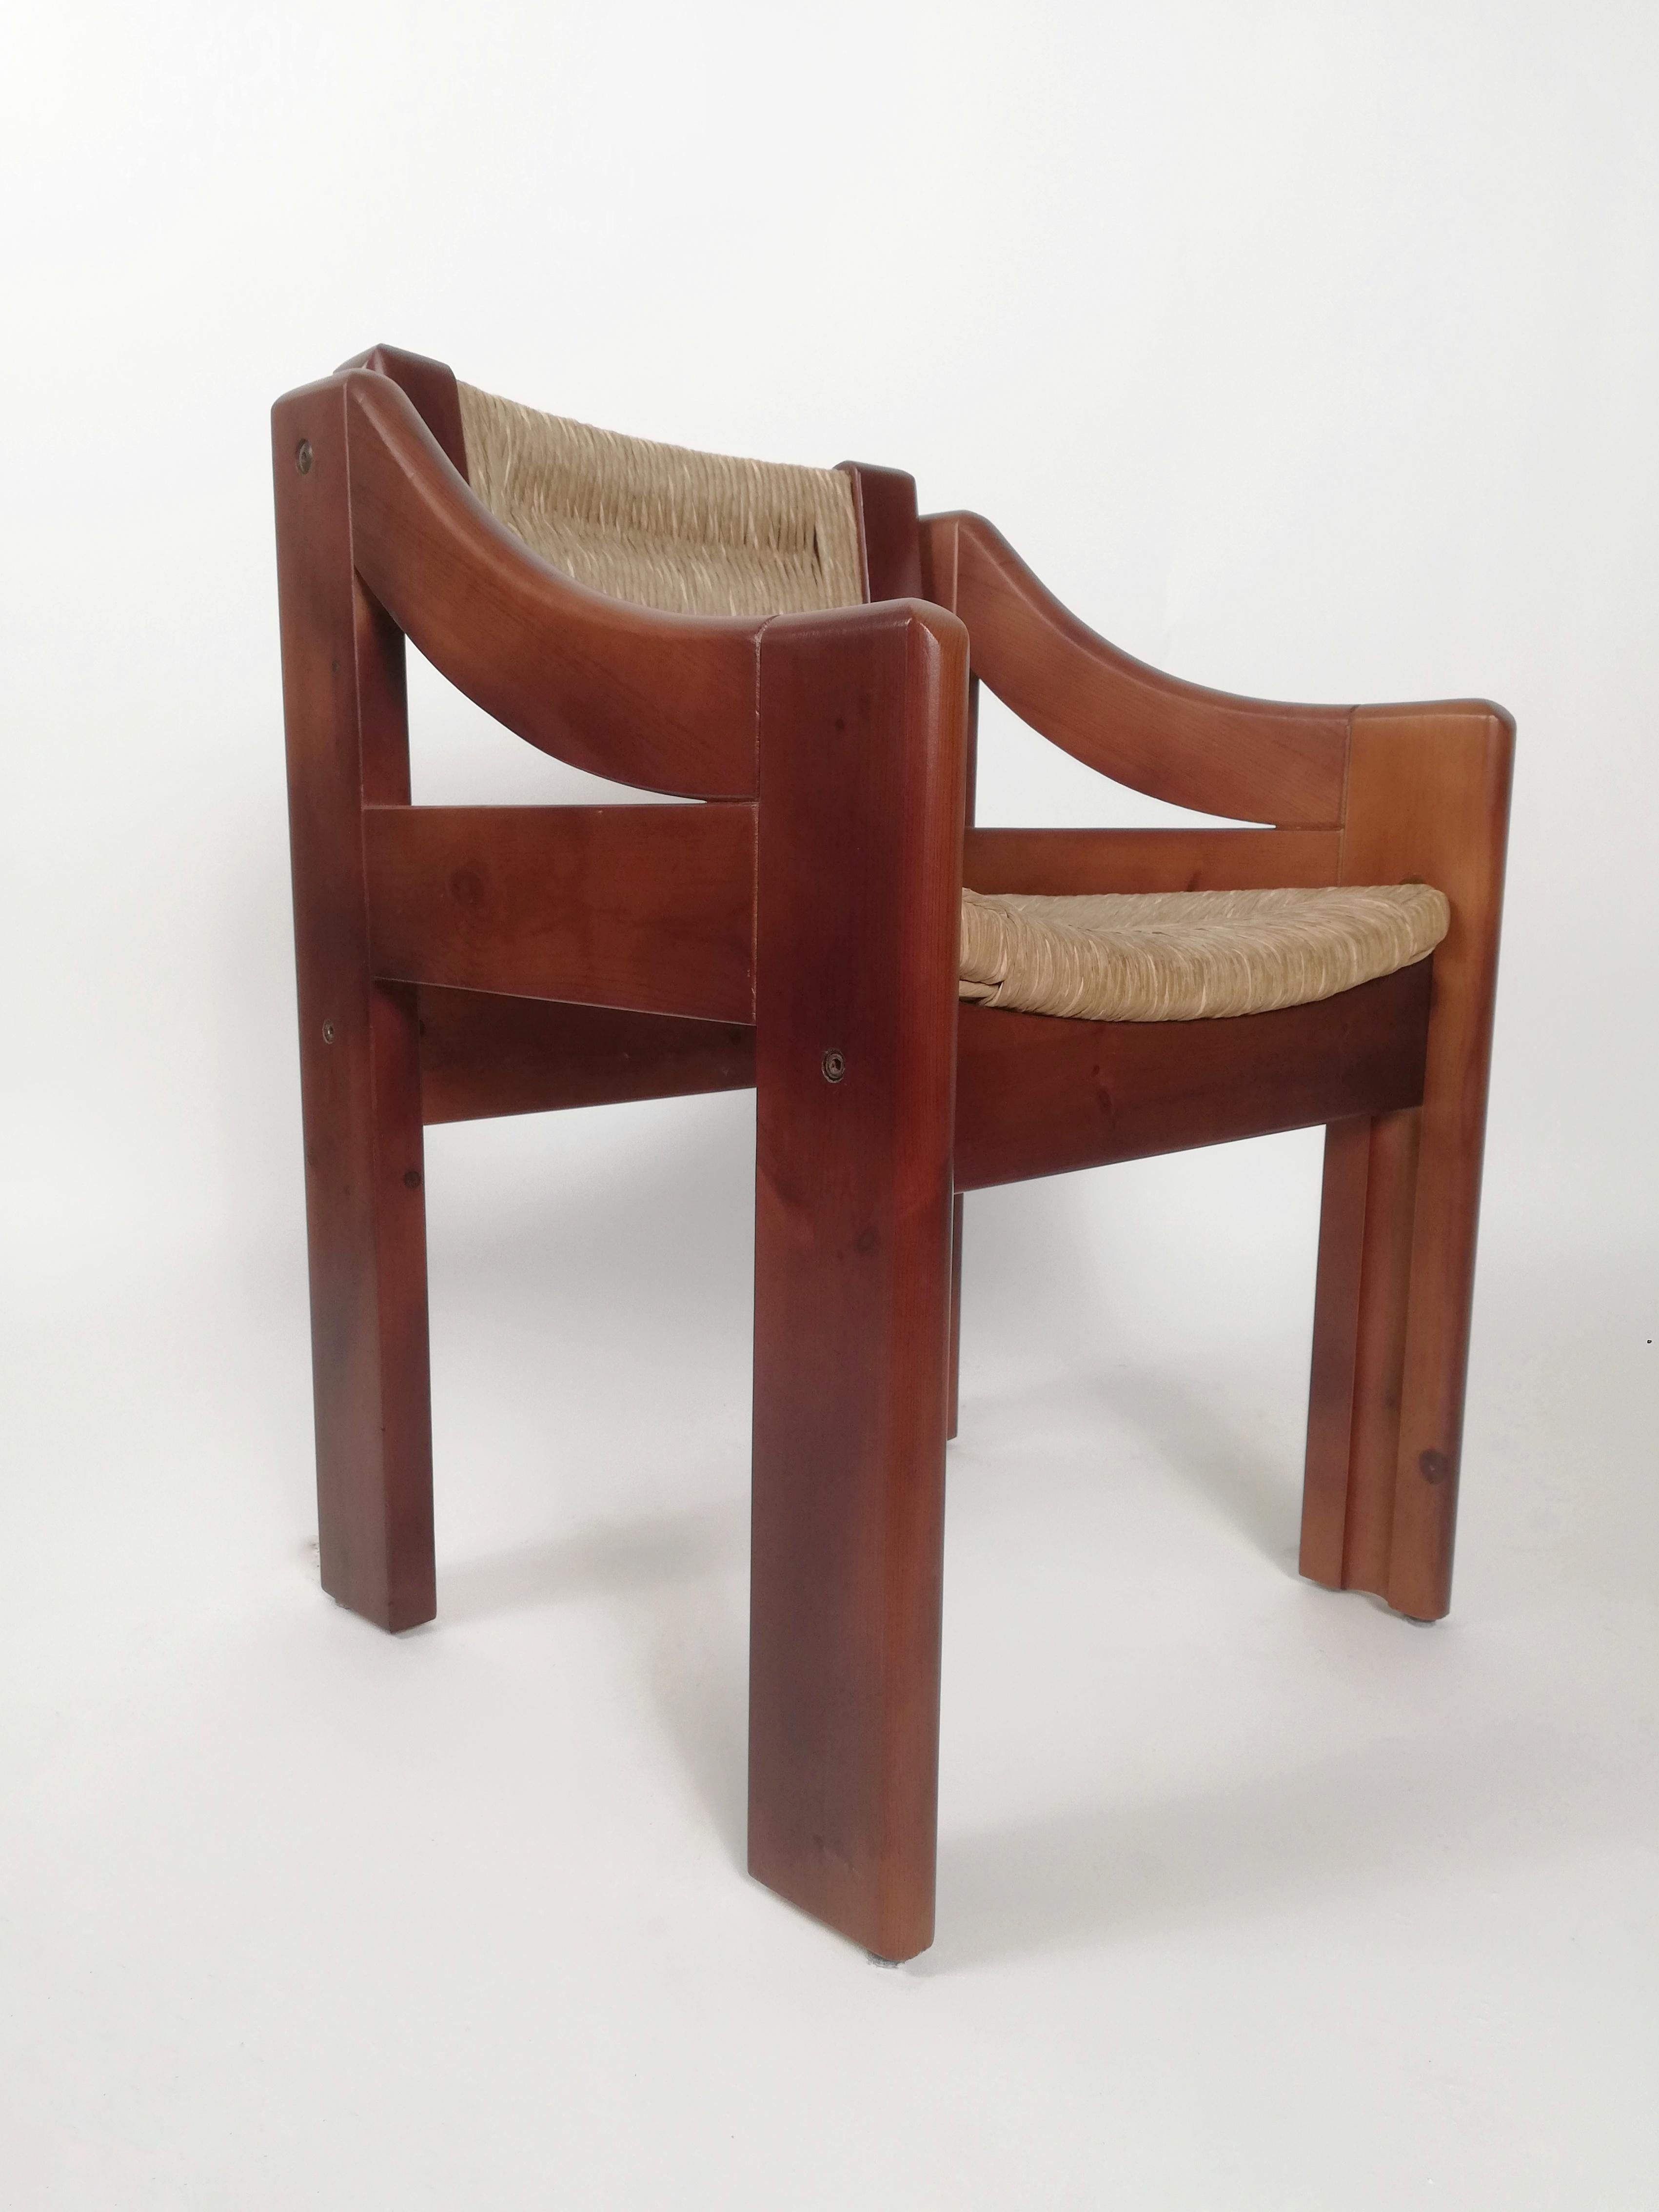 Italian Mid-Century Brutalist Pine and Straw Chairs by Fratelli Montina, Italy, 1960s For Sale